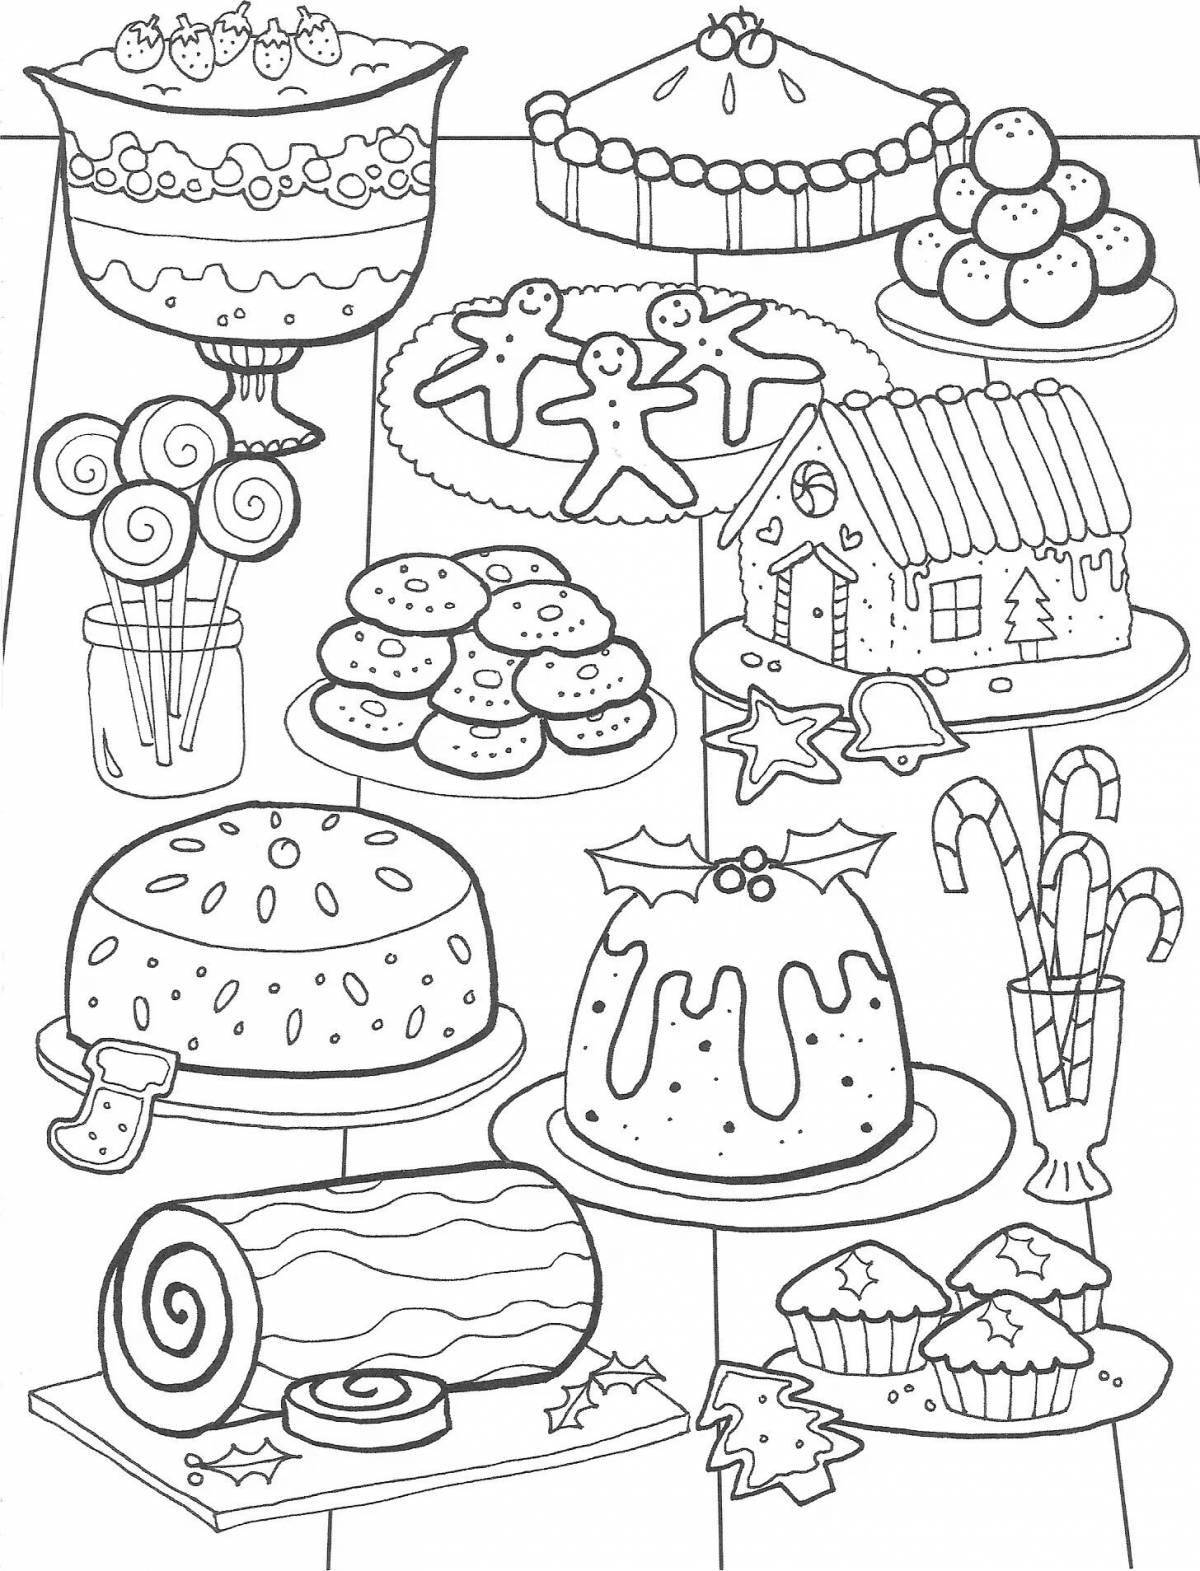 Delightful coloring book for girls 10 years old with food